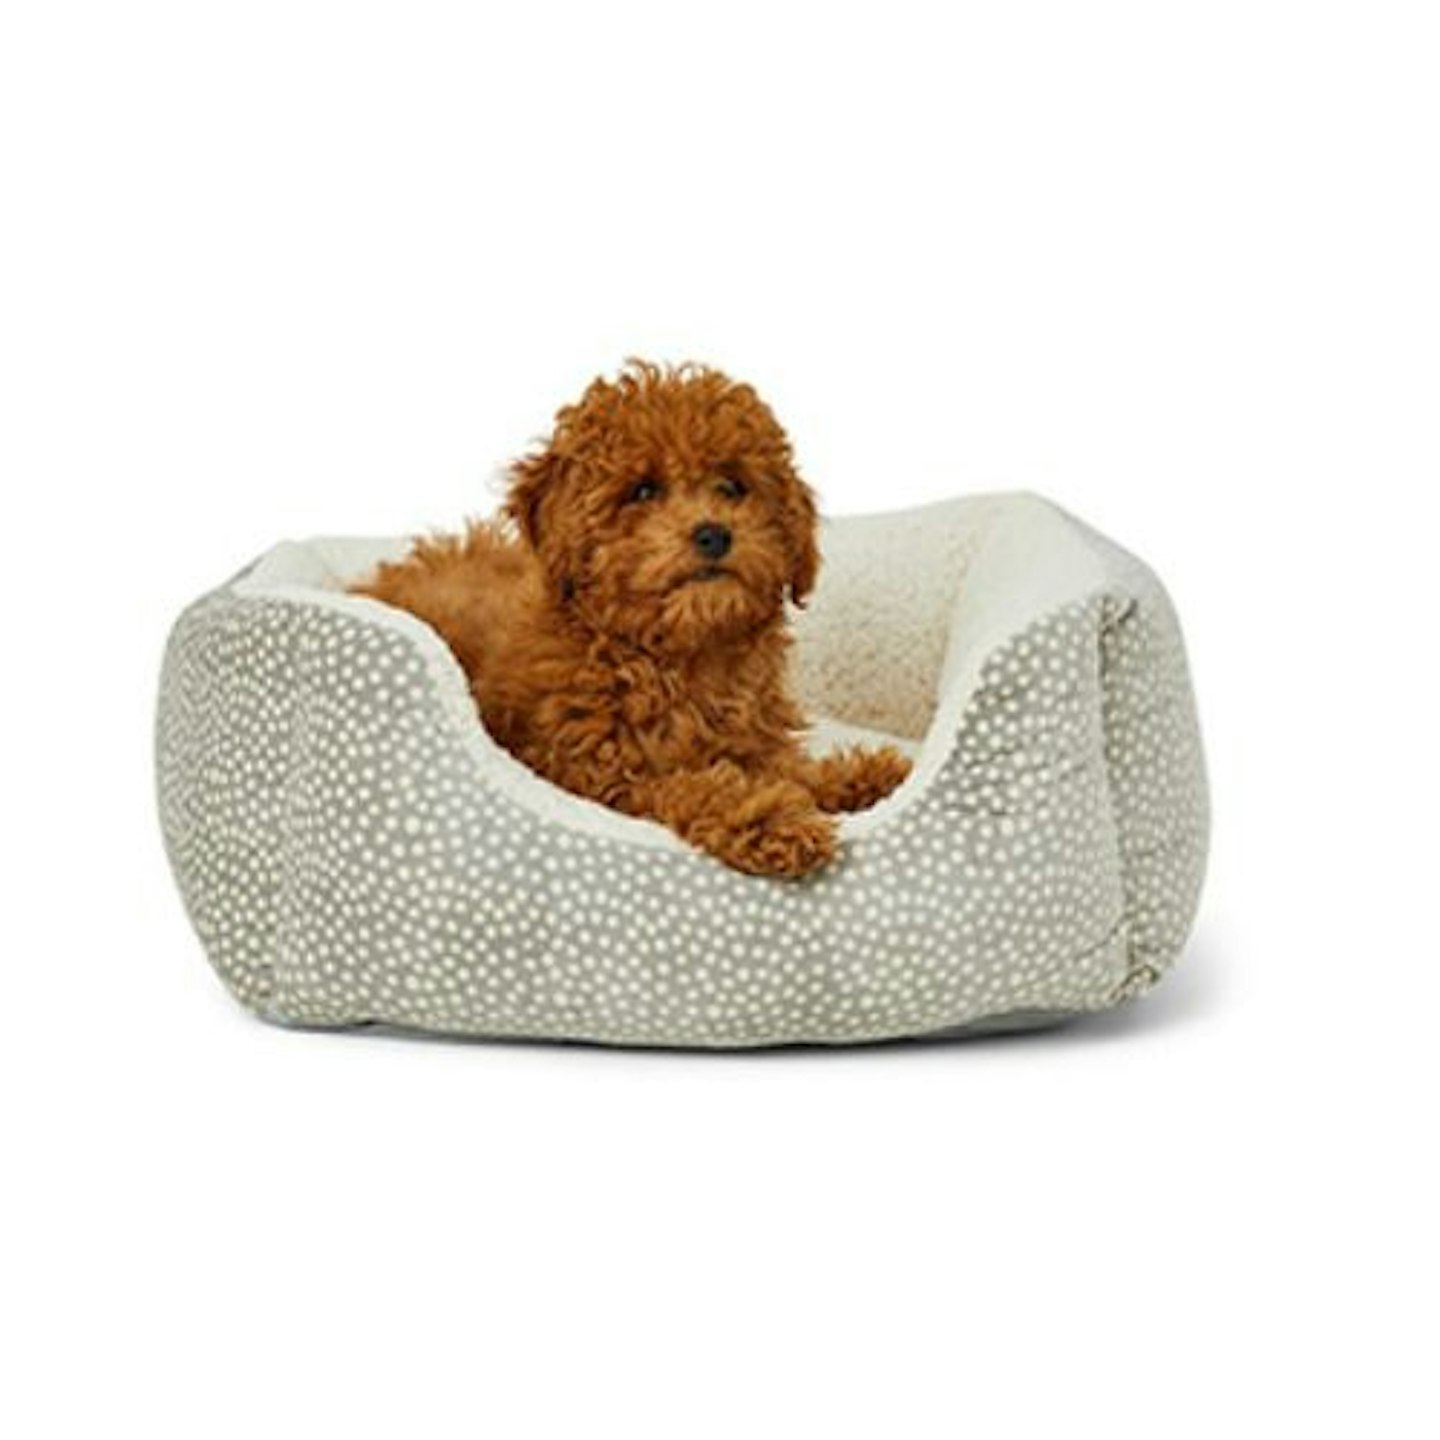 Pets at Home Spotty Square Puppy Bed